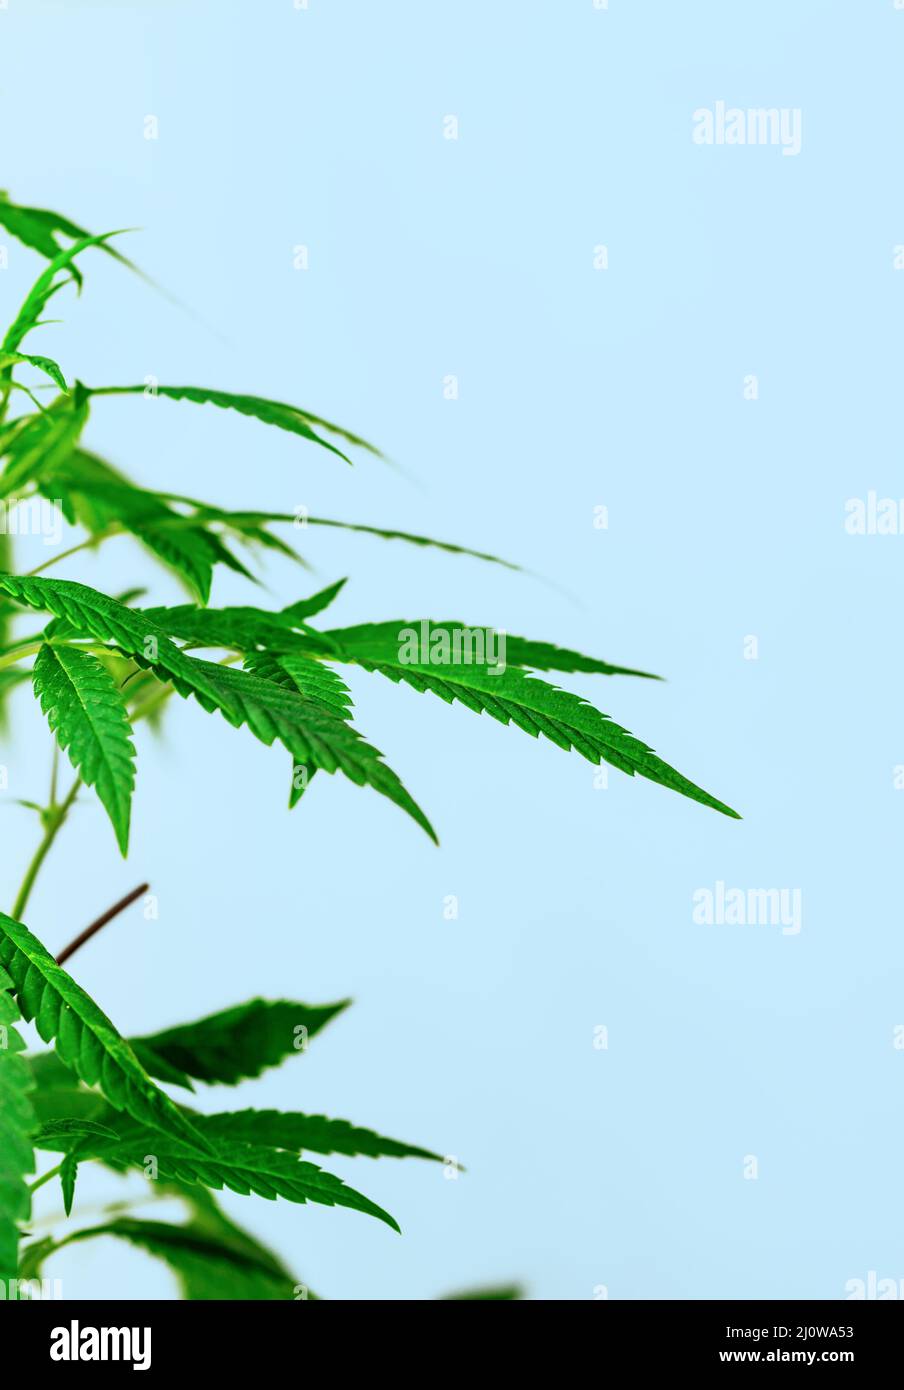 Leafy medical Cannabis plant isolated on blue background with copy space Stock Photo